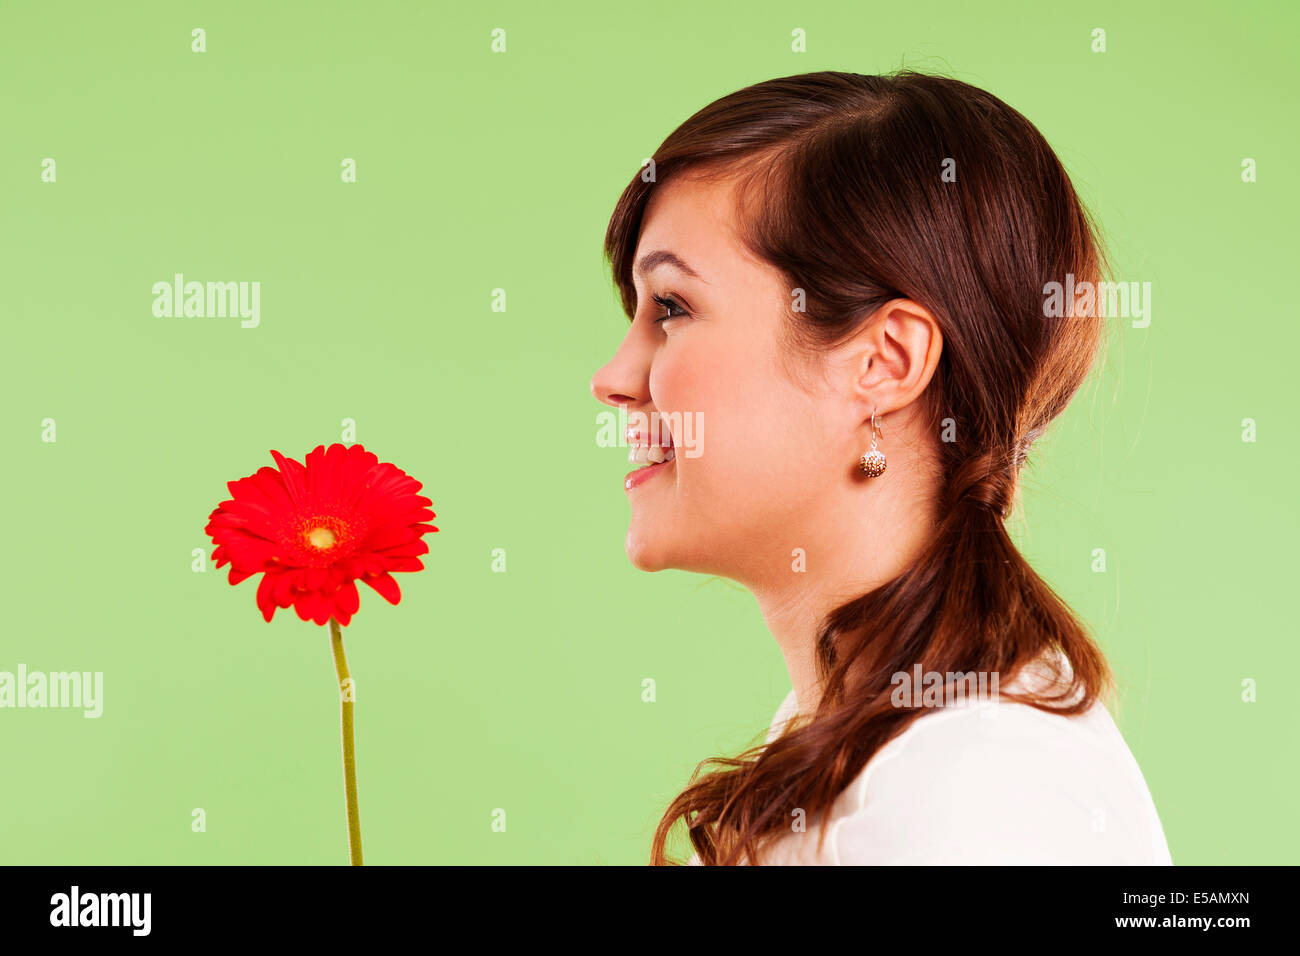 Pretty woman holding red flower, Debica, Poland Stock Photo